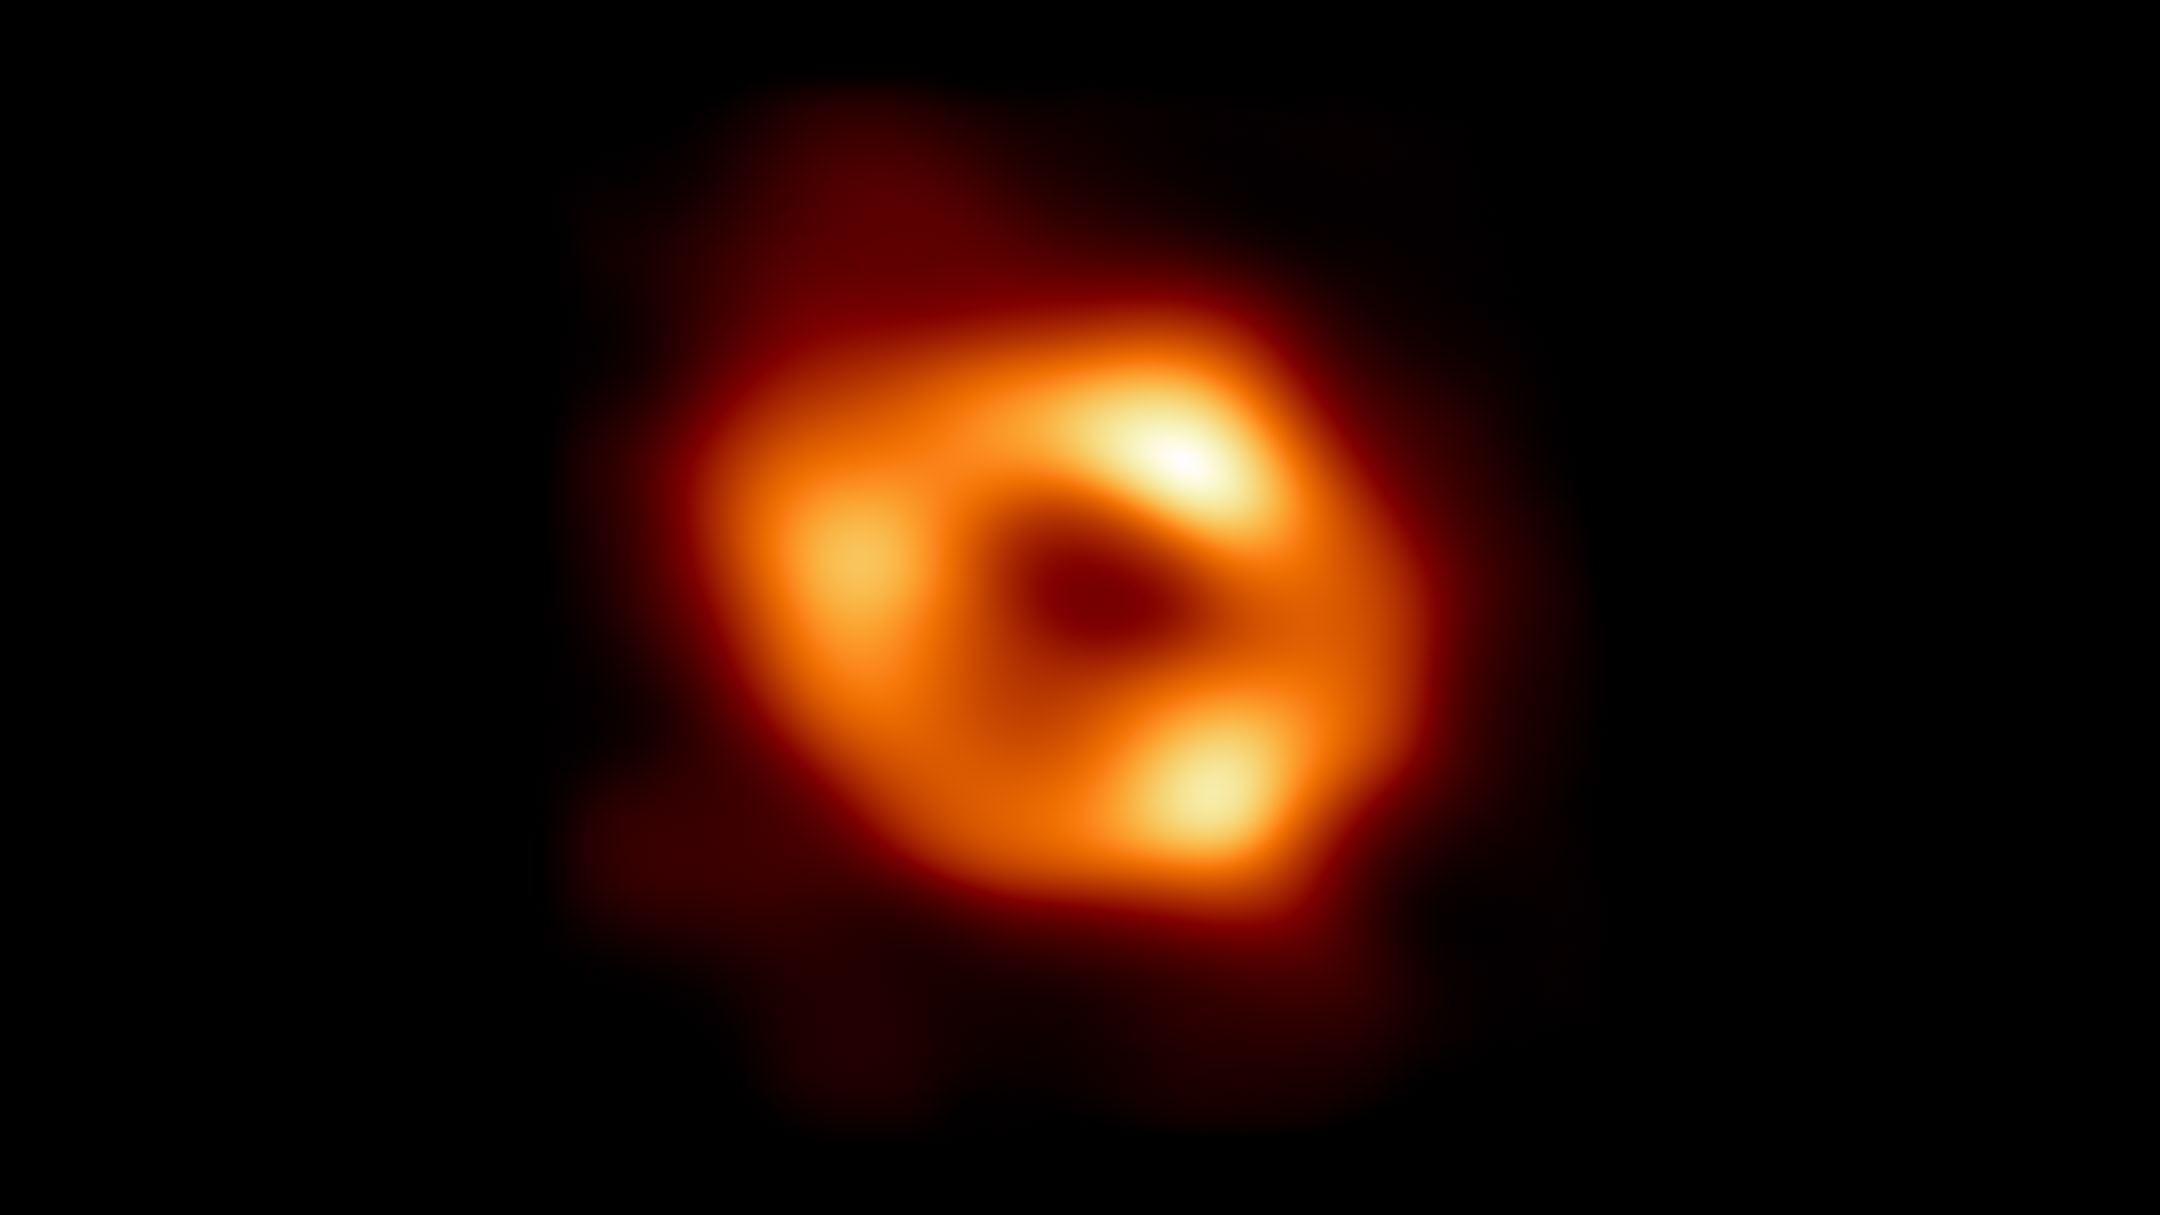 First image of the black hole at the center of the Milky WayThis is the first image of Sagittarius A* (or Sgr A* for short), the supermassive black hole at the center of our galaxy. It's the first direct visual evidence of the presence of this black hole. It was captured by the Event Horizon Telescope (EHT), an array which linked together eight existing radio observatories across the planet to form a single "Earth-sized" virtual telescope. The telescope is named after the "event horizon," the boundary of the black hole beyond which no light can escape.Although we cannot see the event horizon itself, because it cannot emit light, glowing gas orbiting around the black hole reveals a telltale signature: a dark central region (called a "shadow") surrounded by a bright ring-like structure. The new view captures light bent by the powerful gravity of the black hole, which is four million times more massive than our Sun. The image of the Sgr A* black hole is an average of the different images the EHT Collaboration has extracted from its 2017 observations.